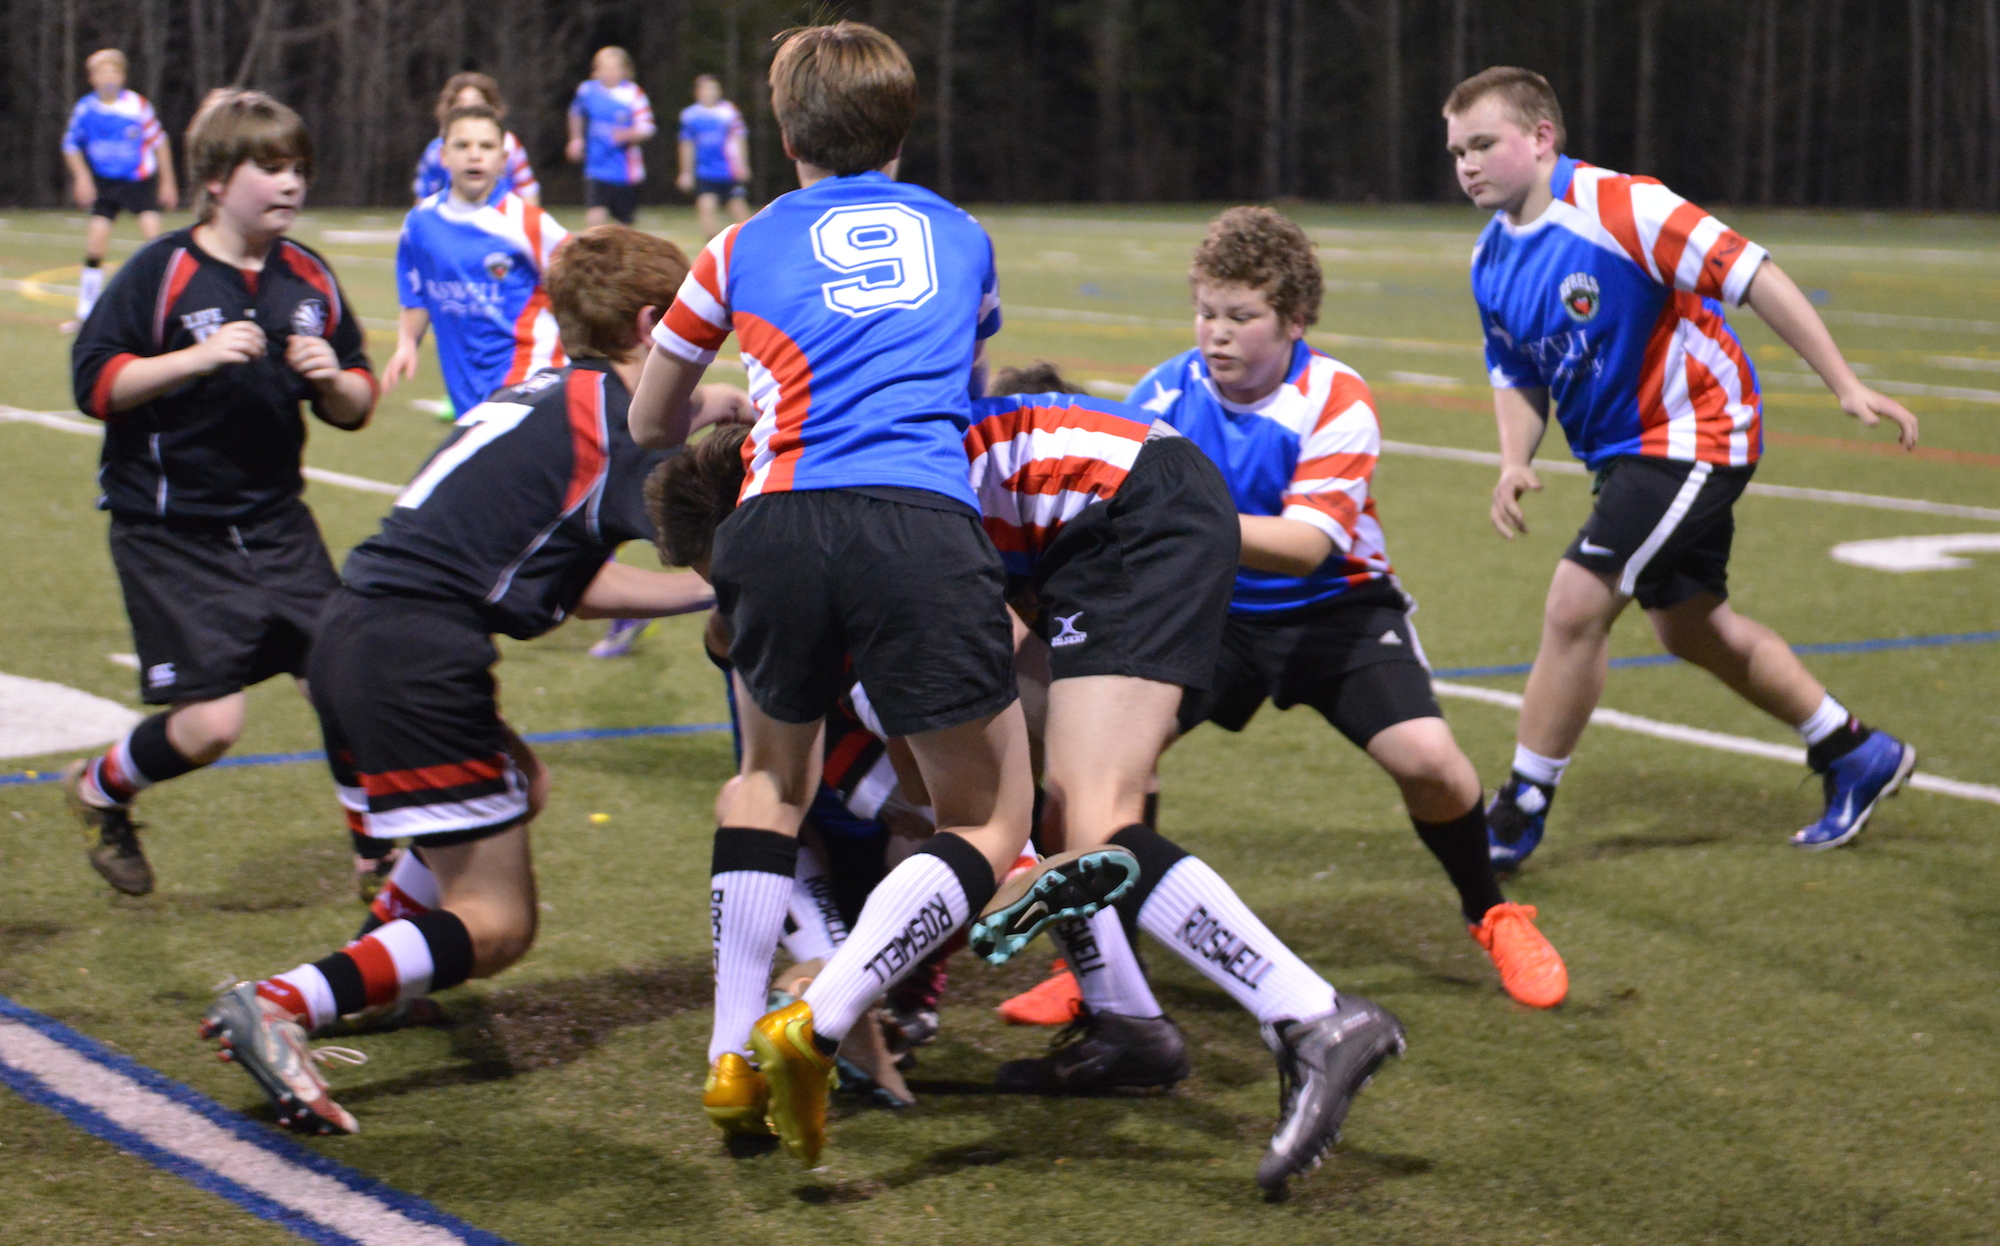 Middle School Rugby in Georgia, USA